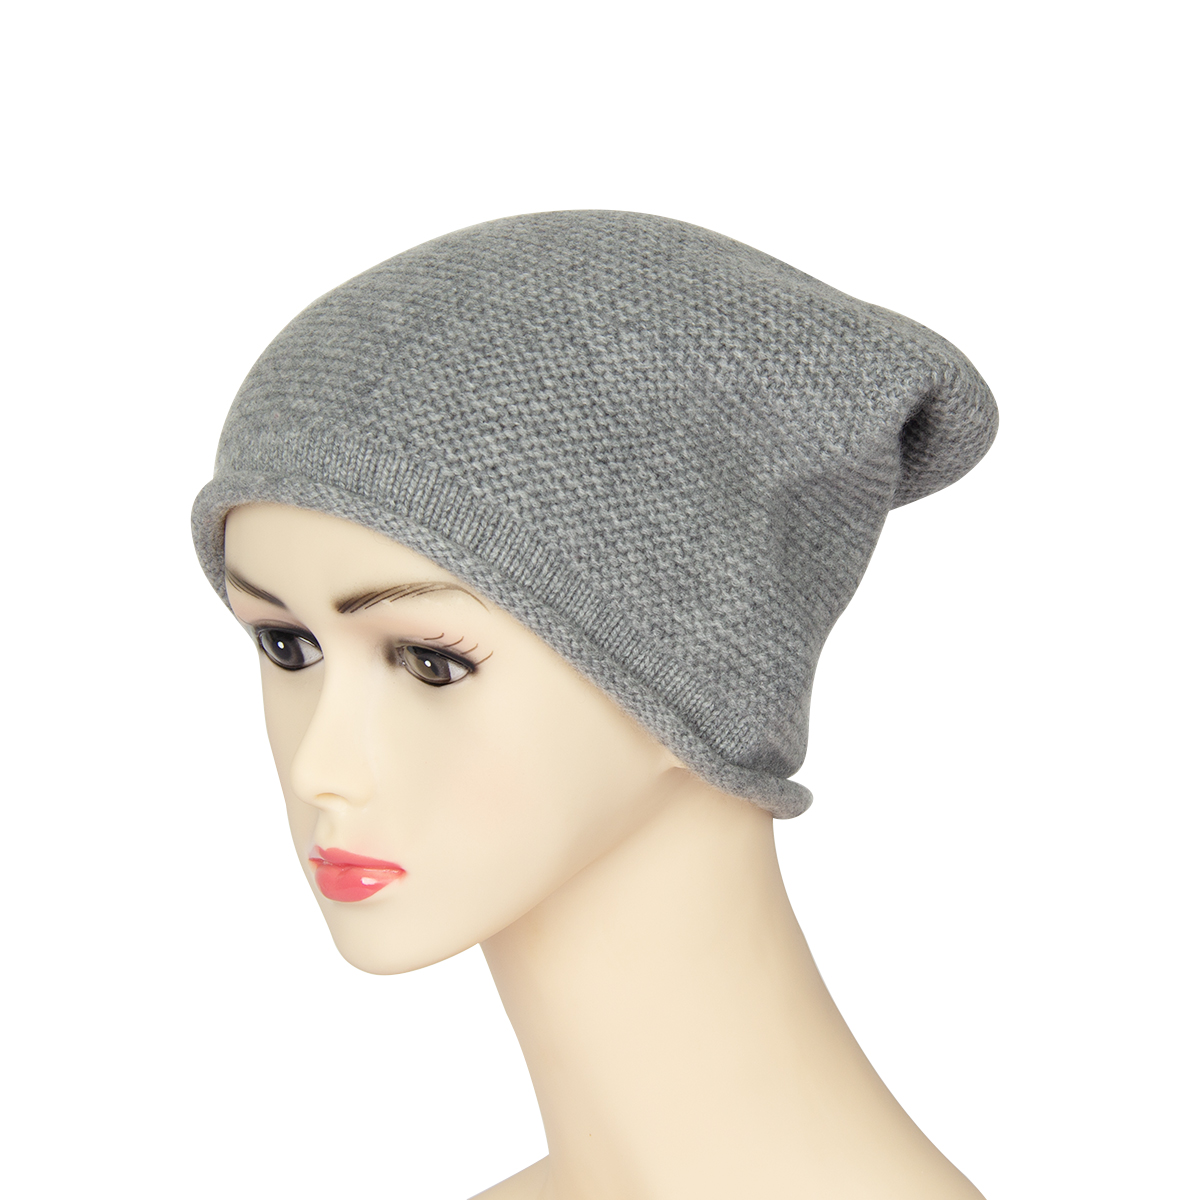 Hot Sale Custom Plain Cashmere Knitted Beanie Hat With Woven Label